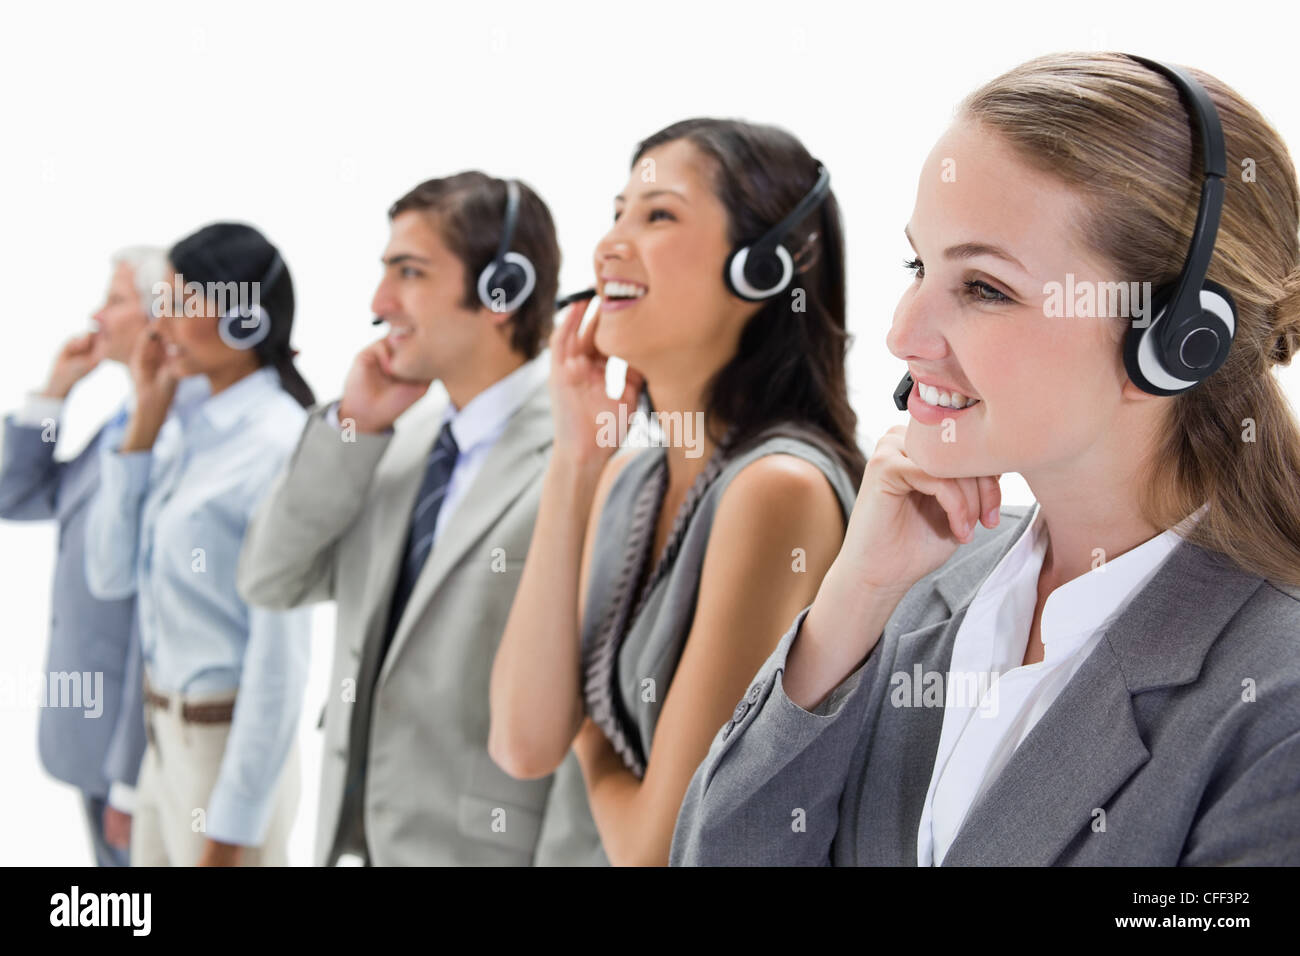 Professionals listening with headsets Stock Photo